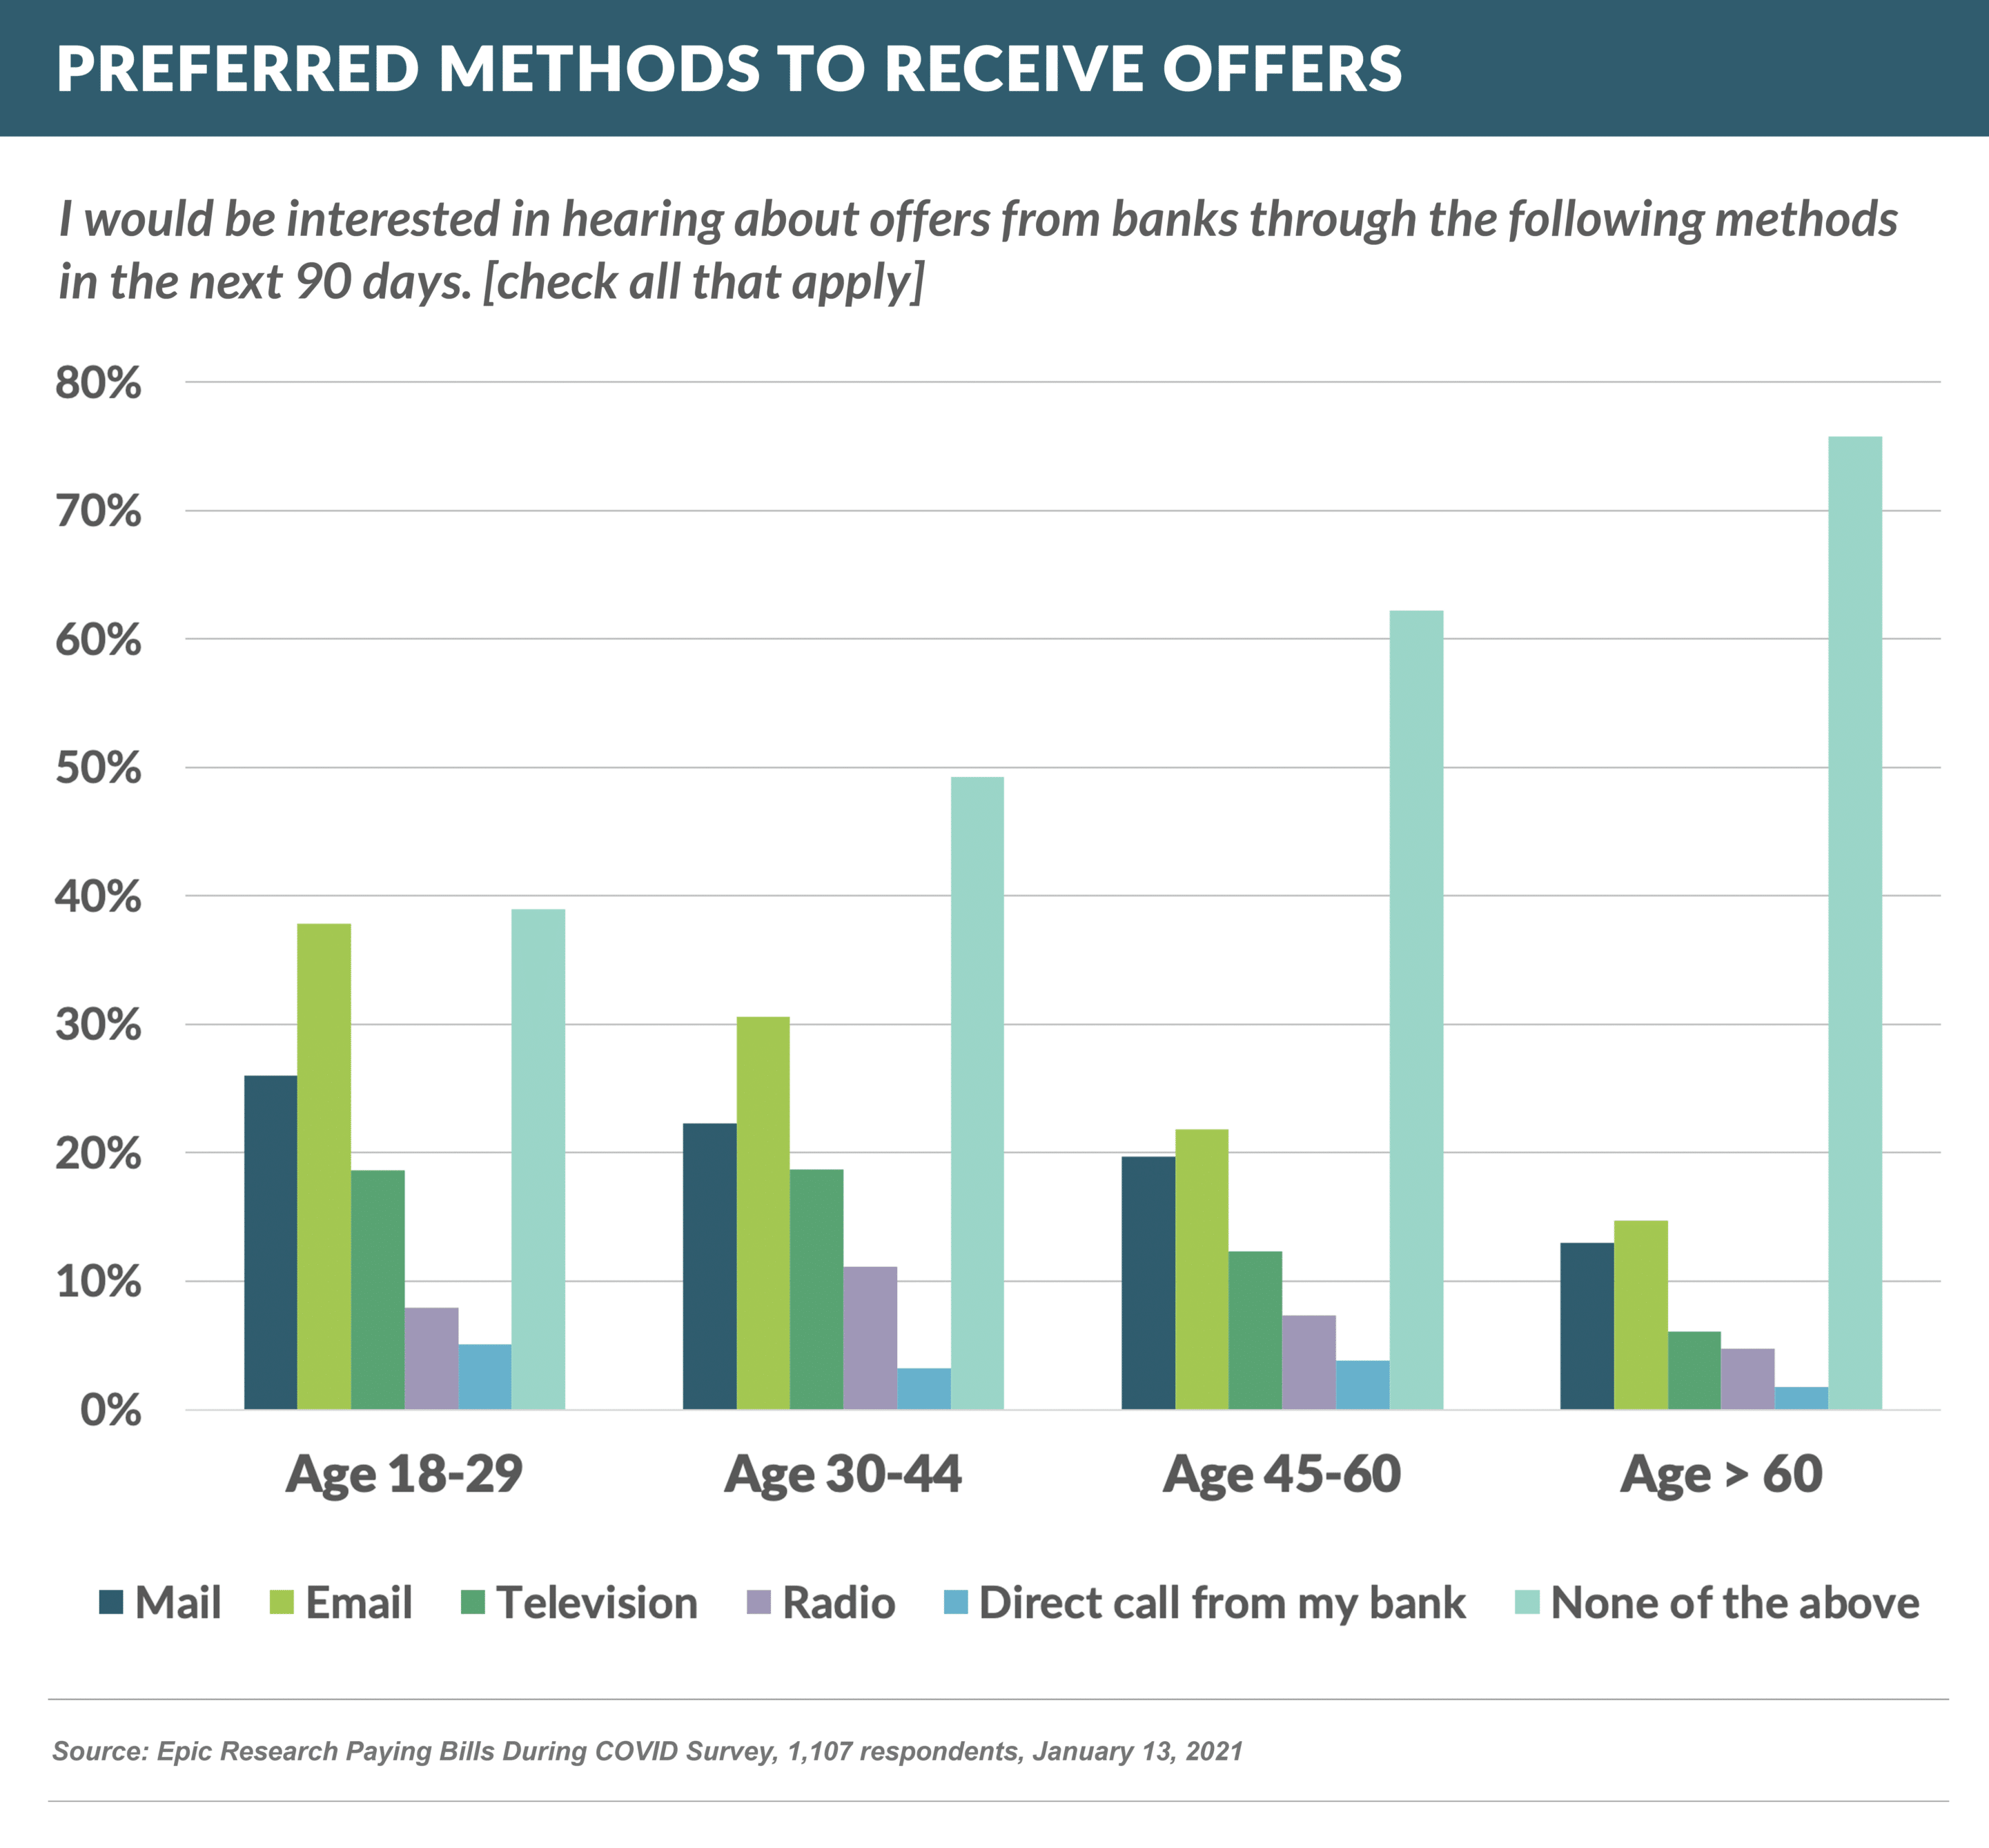 Preferred Methods to Receive Offers